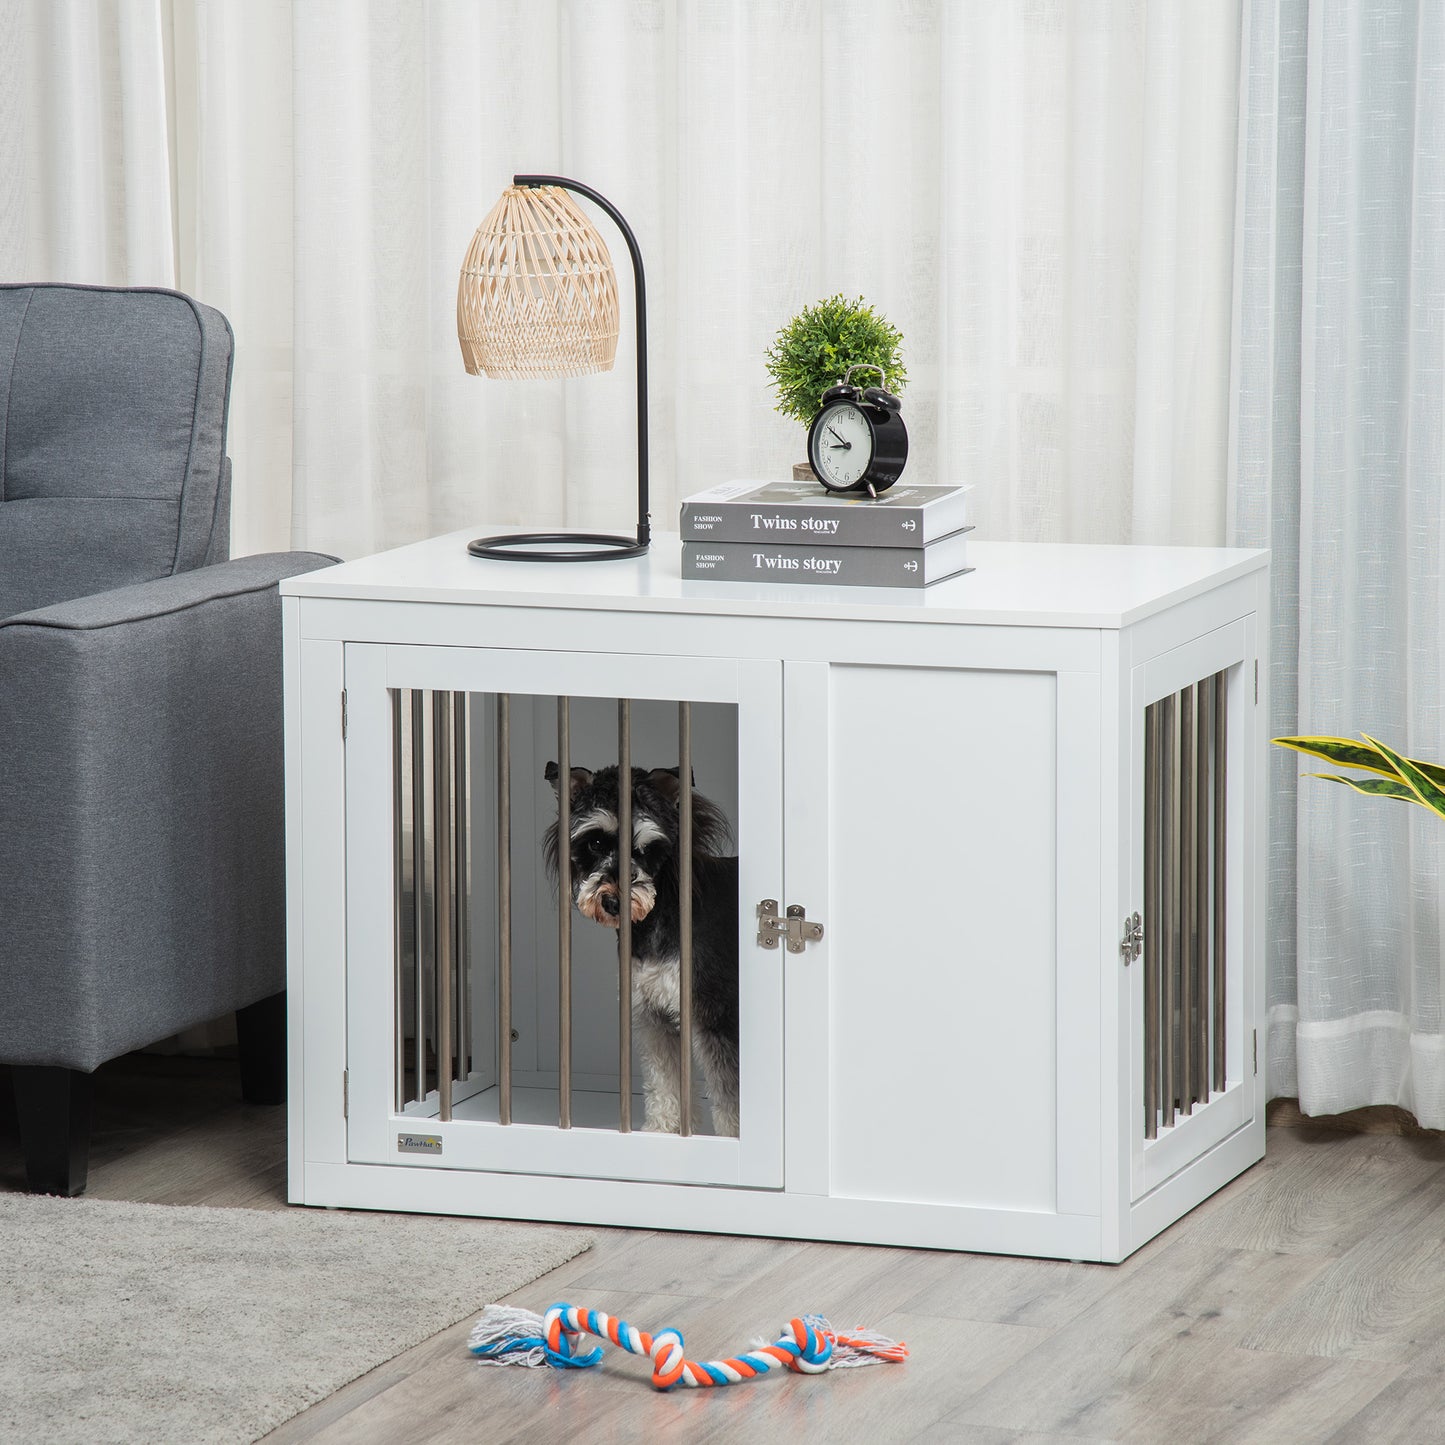 PawHut Furniture Style Dog Crate, End Table Pet Cage Kennel, Indoor Decorative Puppy House, with Double Doors, Locks, for Medium Dogs, White